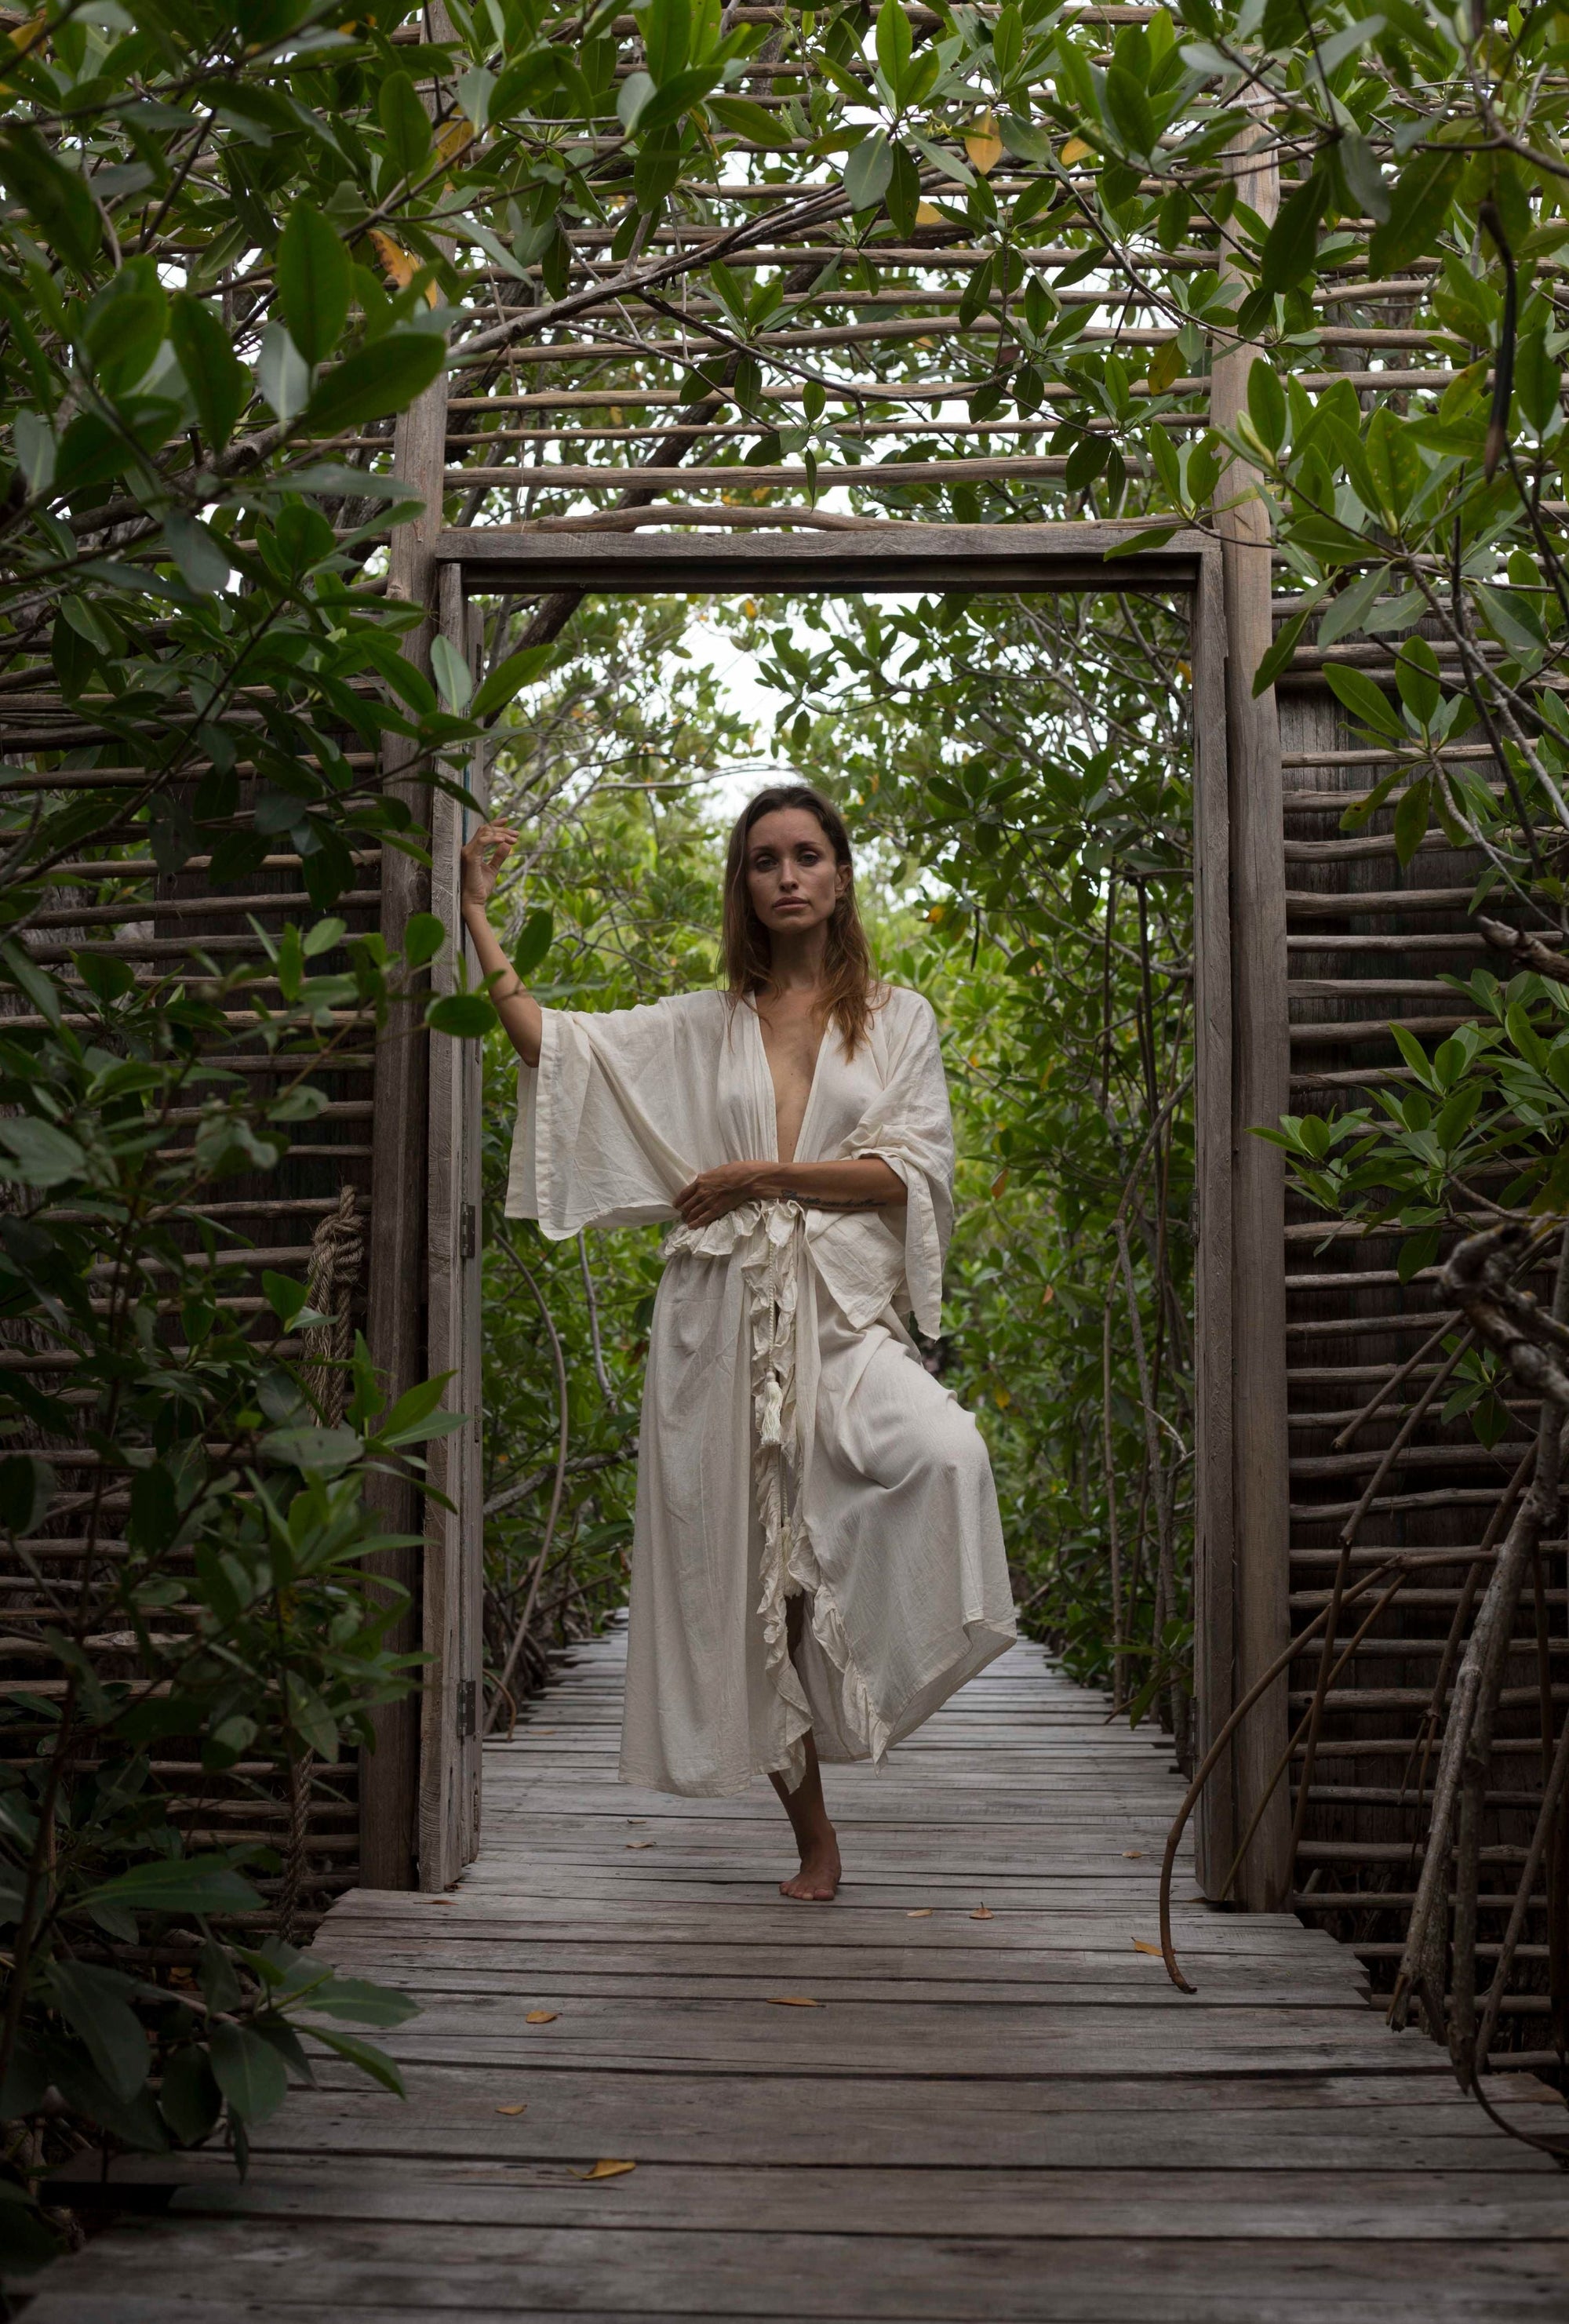 Boho chic, handmade dress 100% crafted in Tulum, relaxed luxury. Soft natural fabric, Tulum clothing, Tulum kaftan, Tulum outfit, Beach kaftan, Beach maxi dress, tulum vibes outfit, sustainable dress